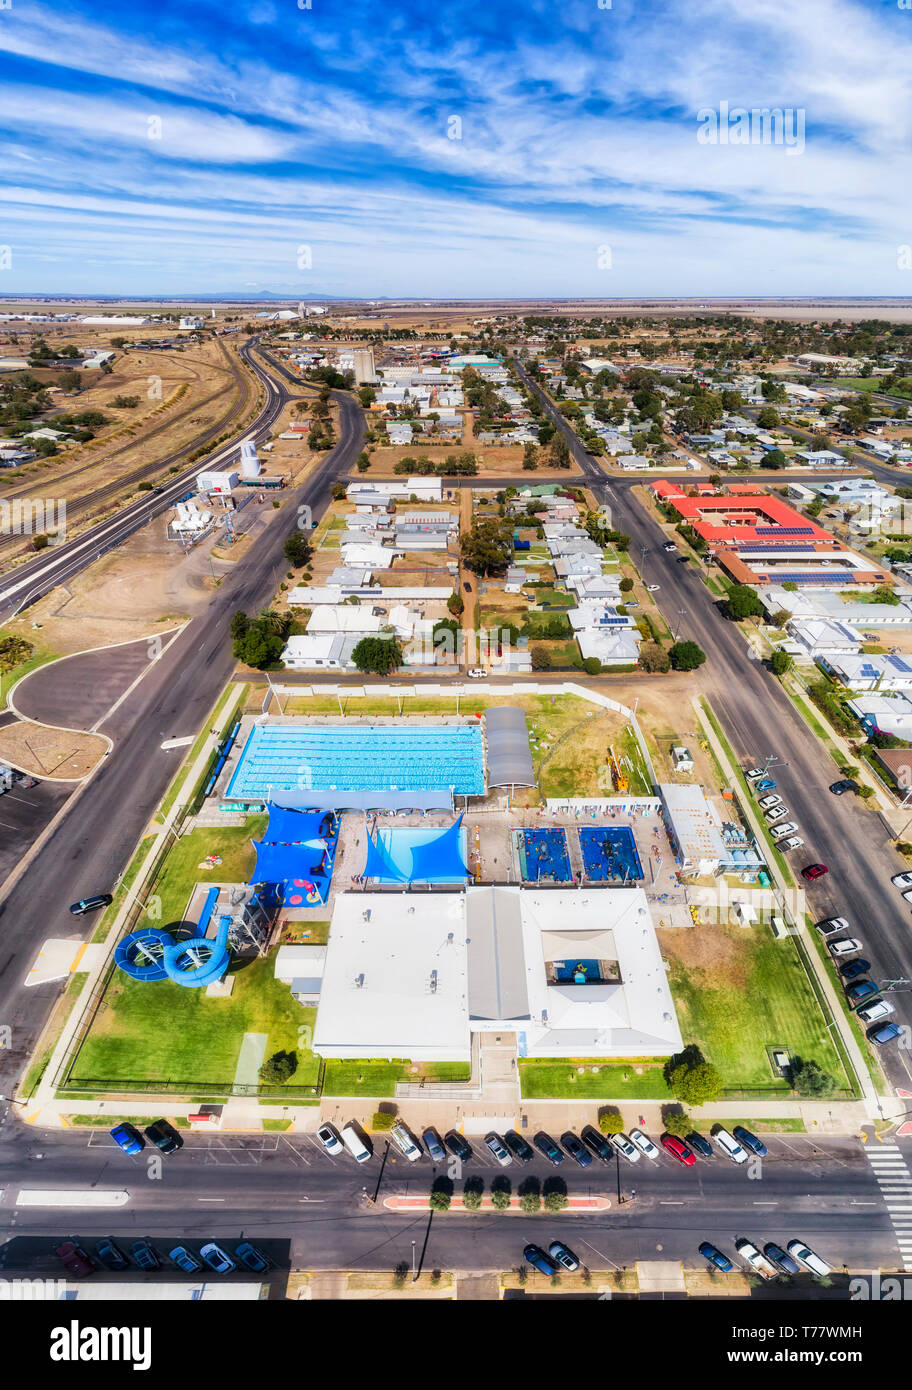 Popular holiday destination Moree town aquatic centre with hot artesian water from artesian basin in sports complex for relaxation and exercise for en Stock Photo